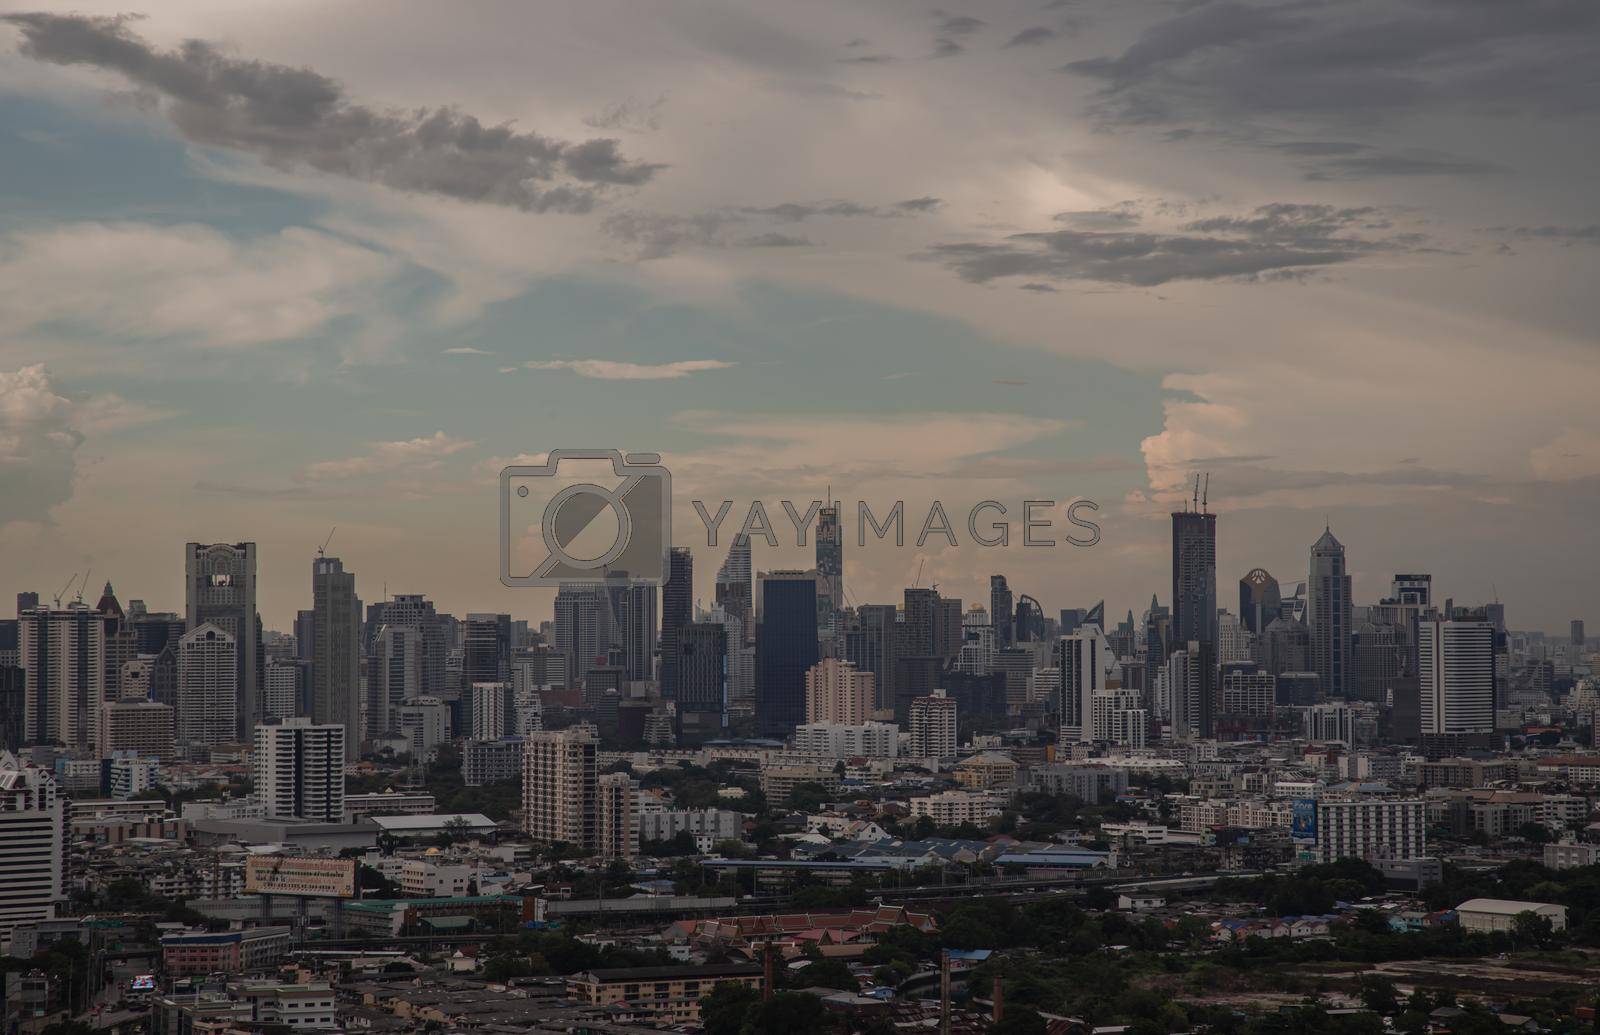 Bangkok, Thailand - 22 Mar, 2022 : Beautiful scenery view over large metropol city in Asia. With tall building and skyscraper in background.